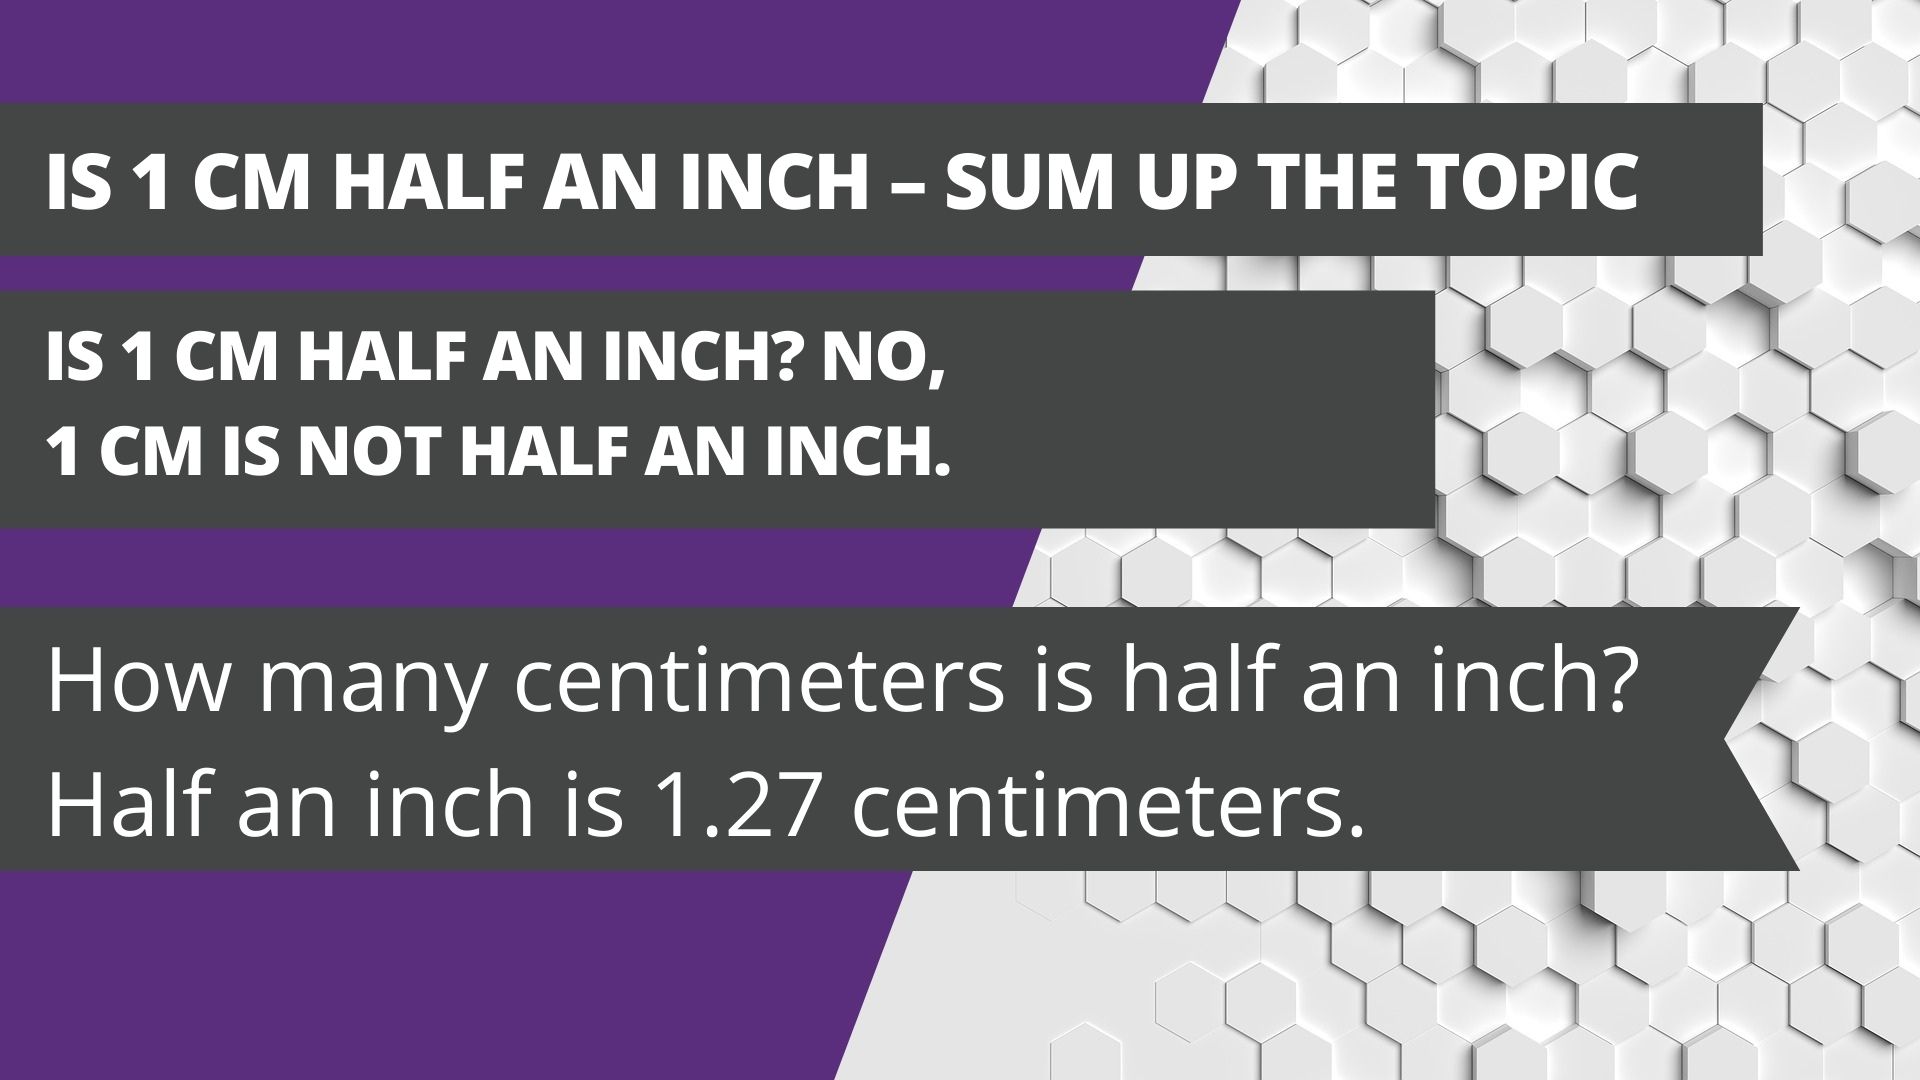 Is 1 cm half an inch – sum up the topic